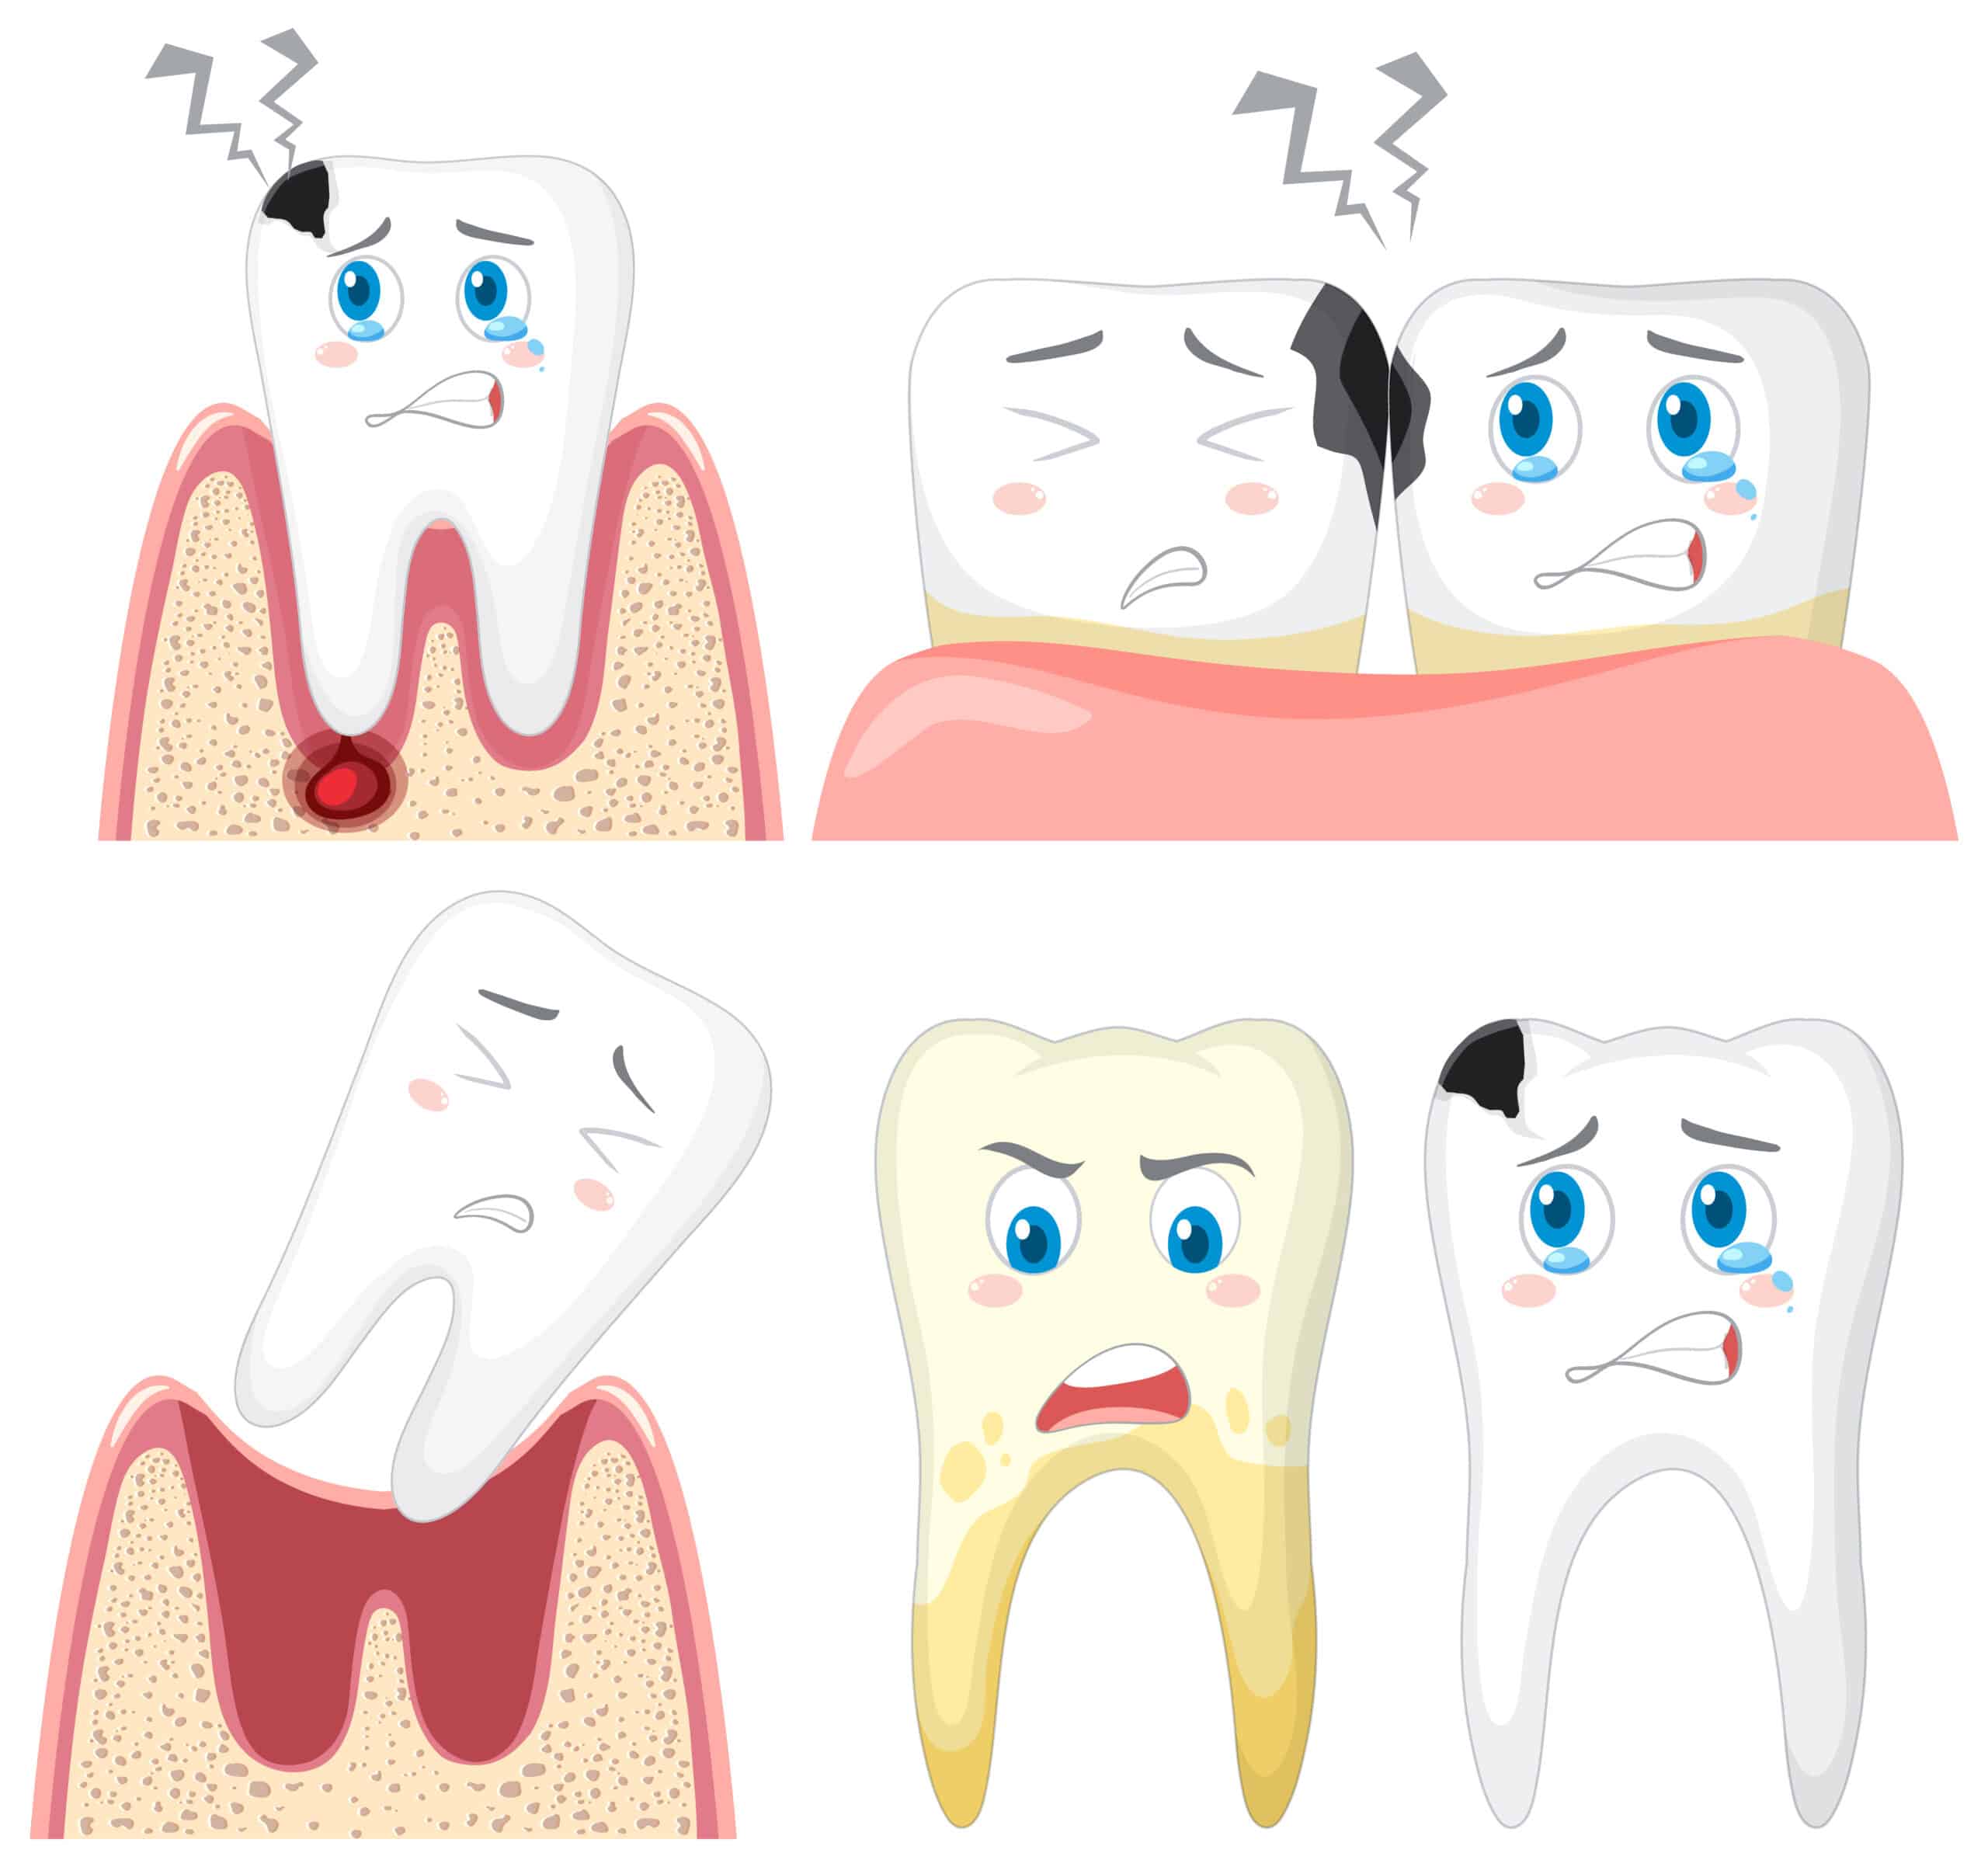 Fixing a chipped tooth can vary depending on the severity of the chip. Here's a general guide on what you can do